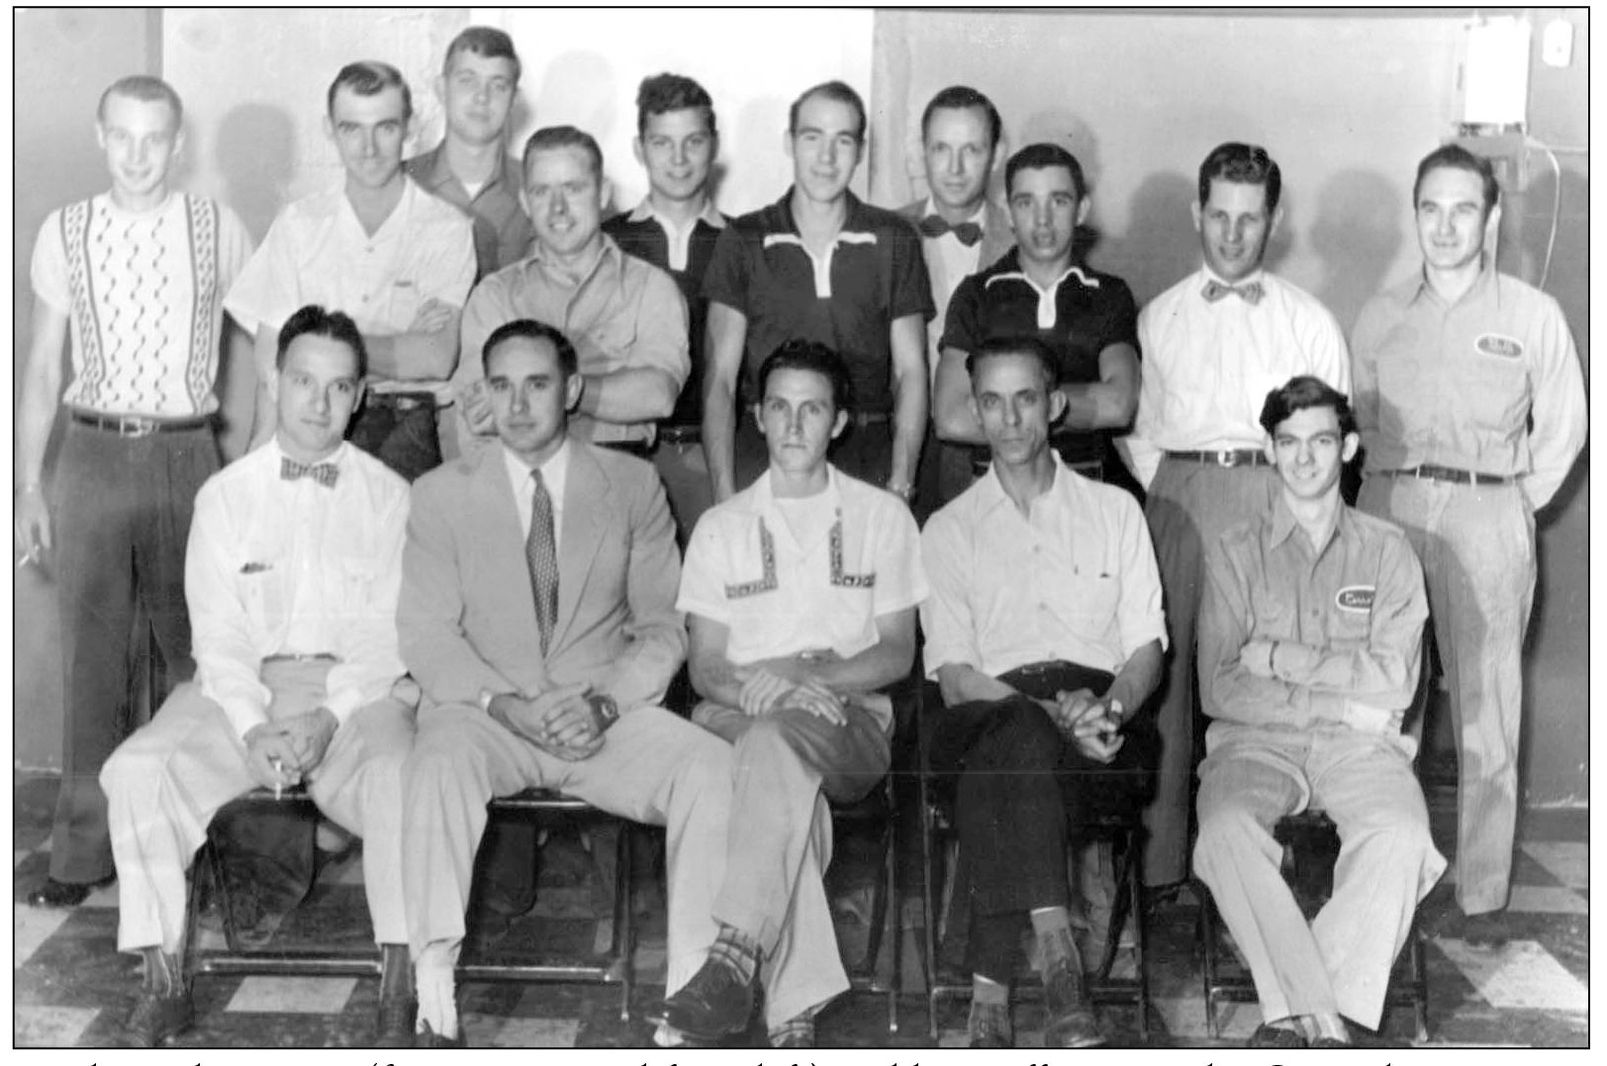 Frank P Thomas Jr first row second from left and his staff pose at the - photo 11